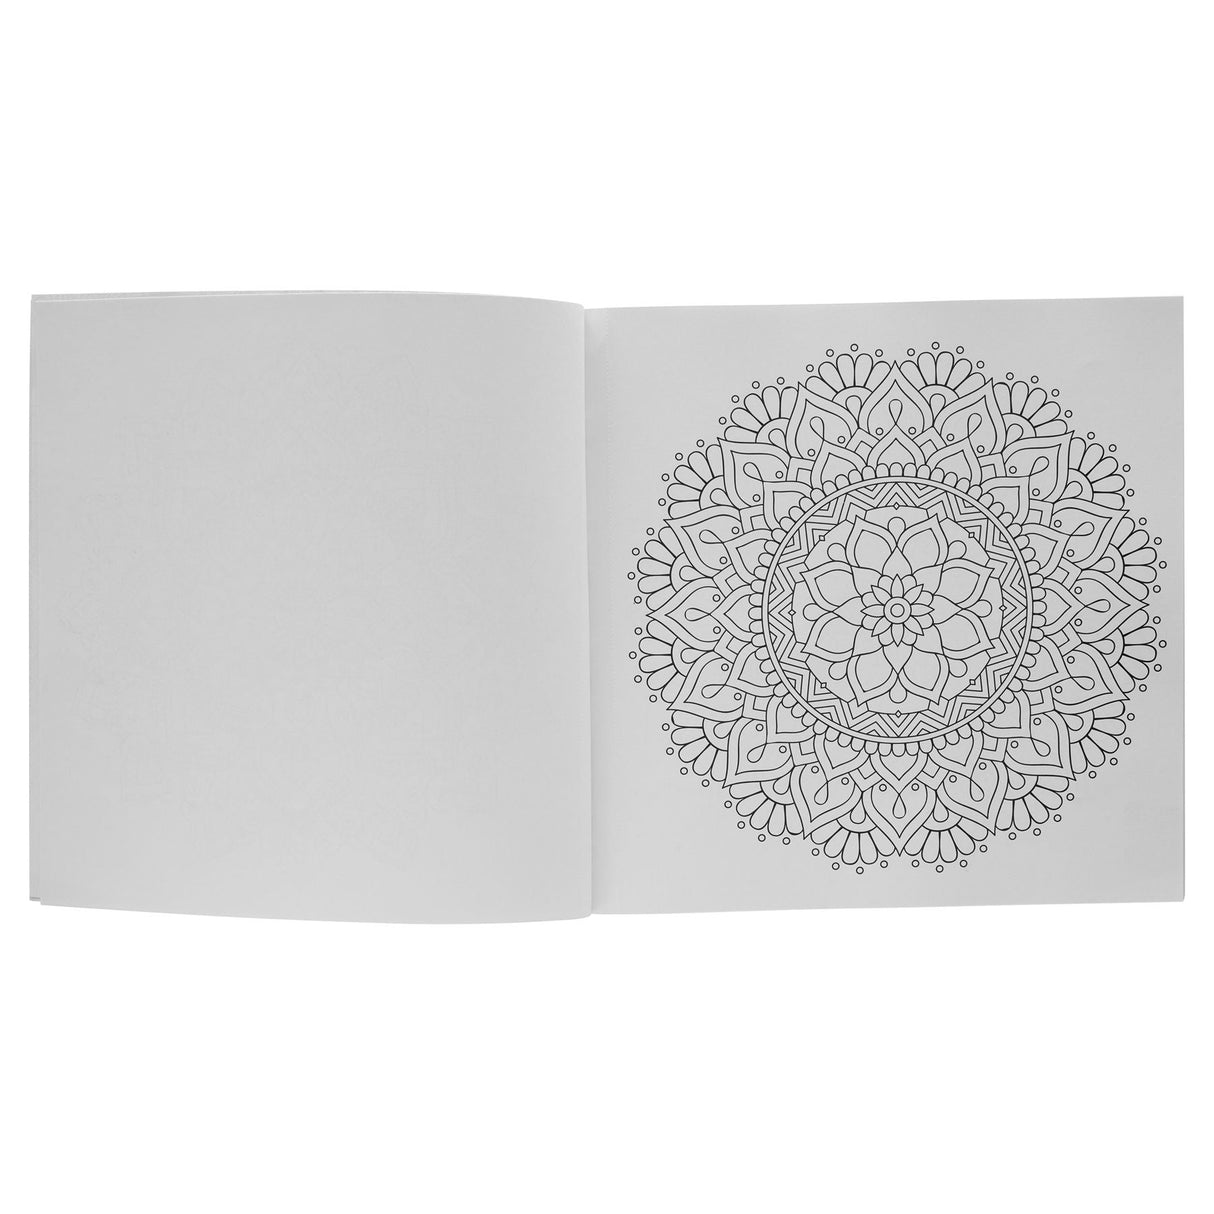 World of Colour Creative - Mindful Colouring Book-Adult Colouring Books-World of Colour|StationeryShop.co.uk